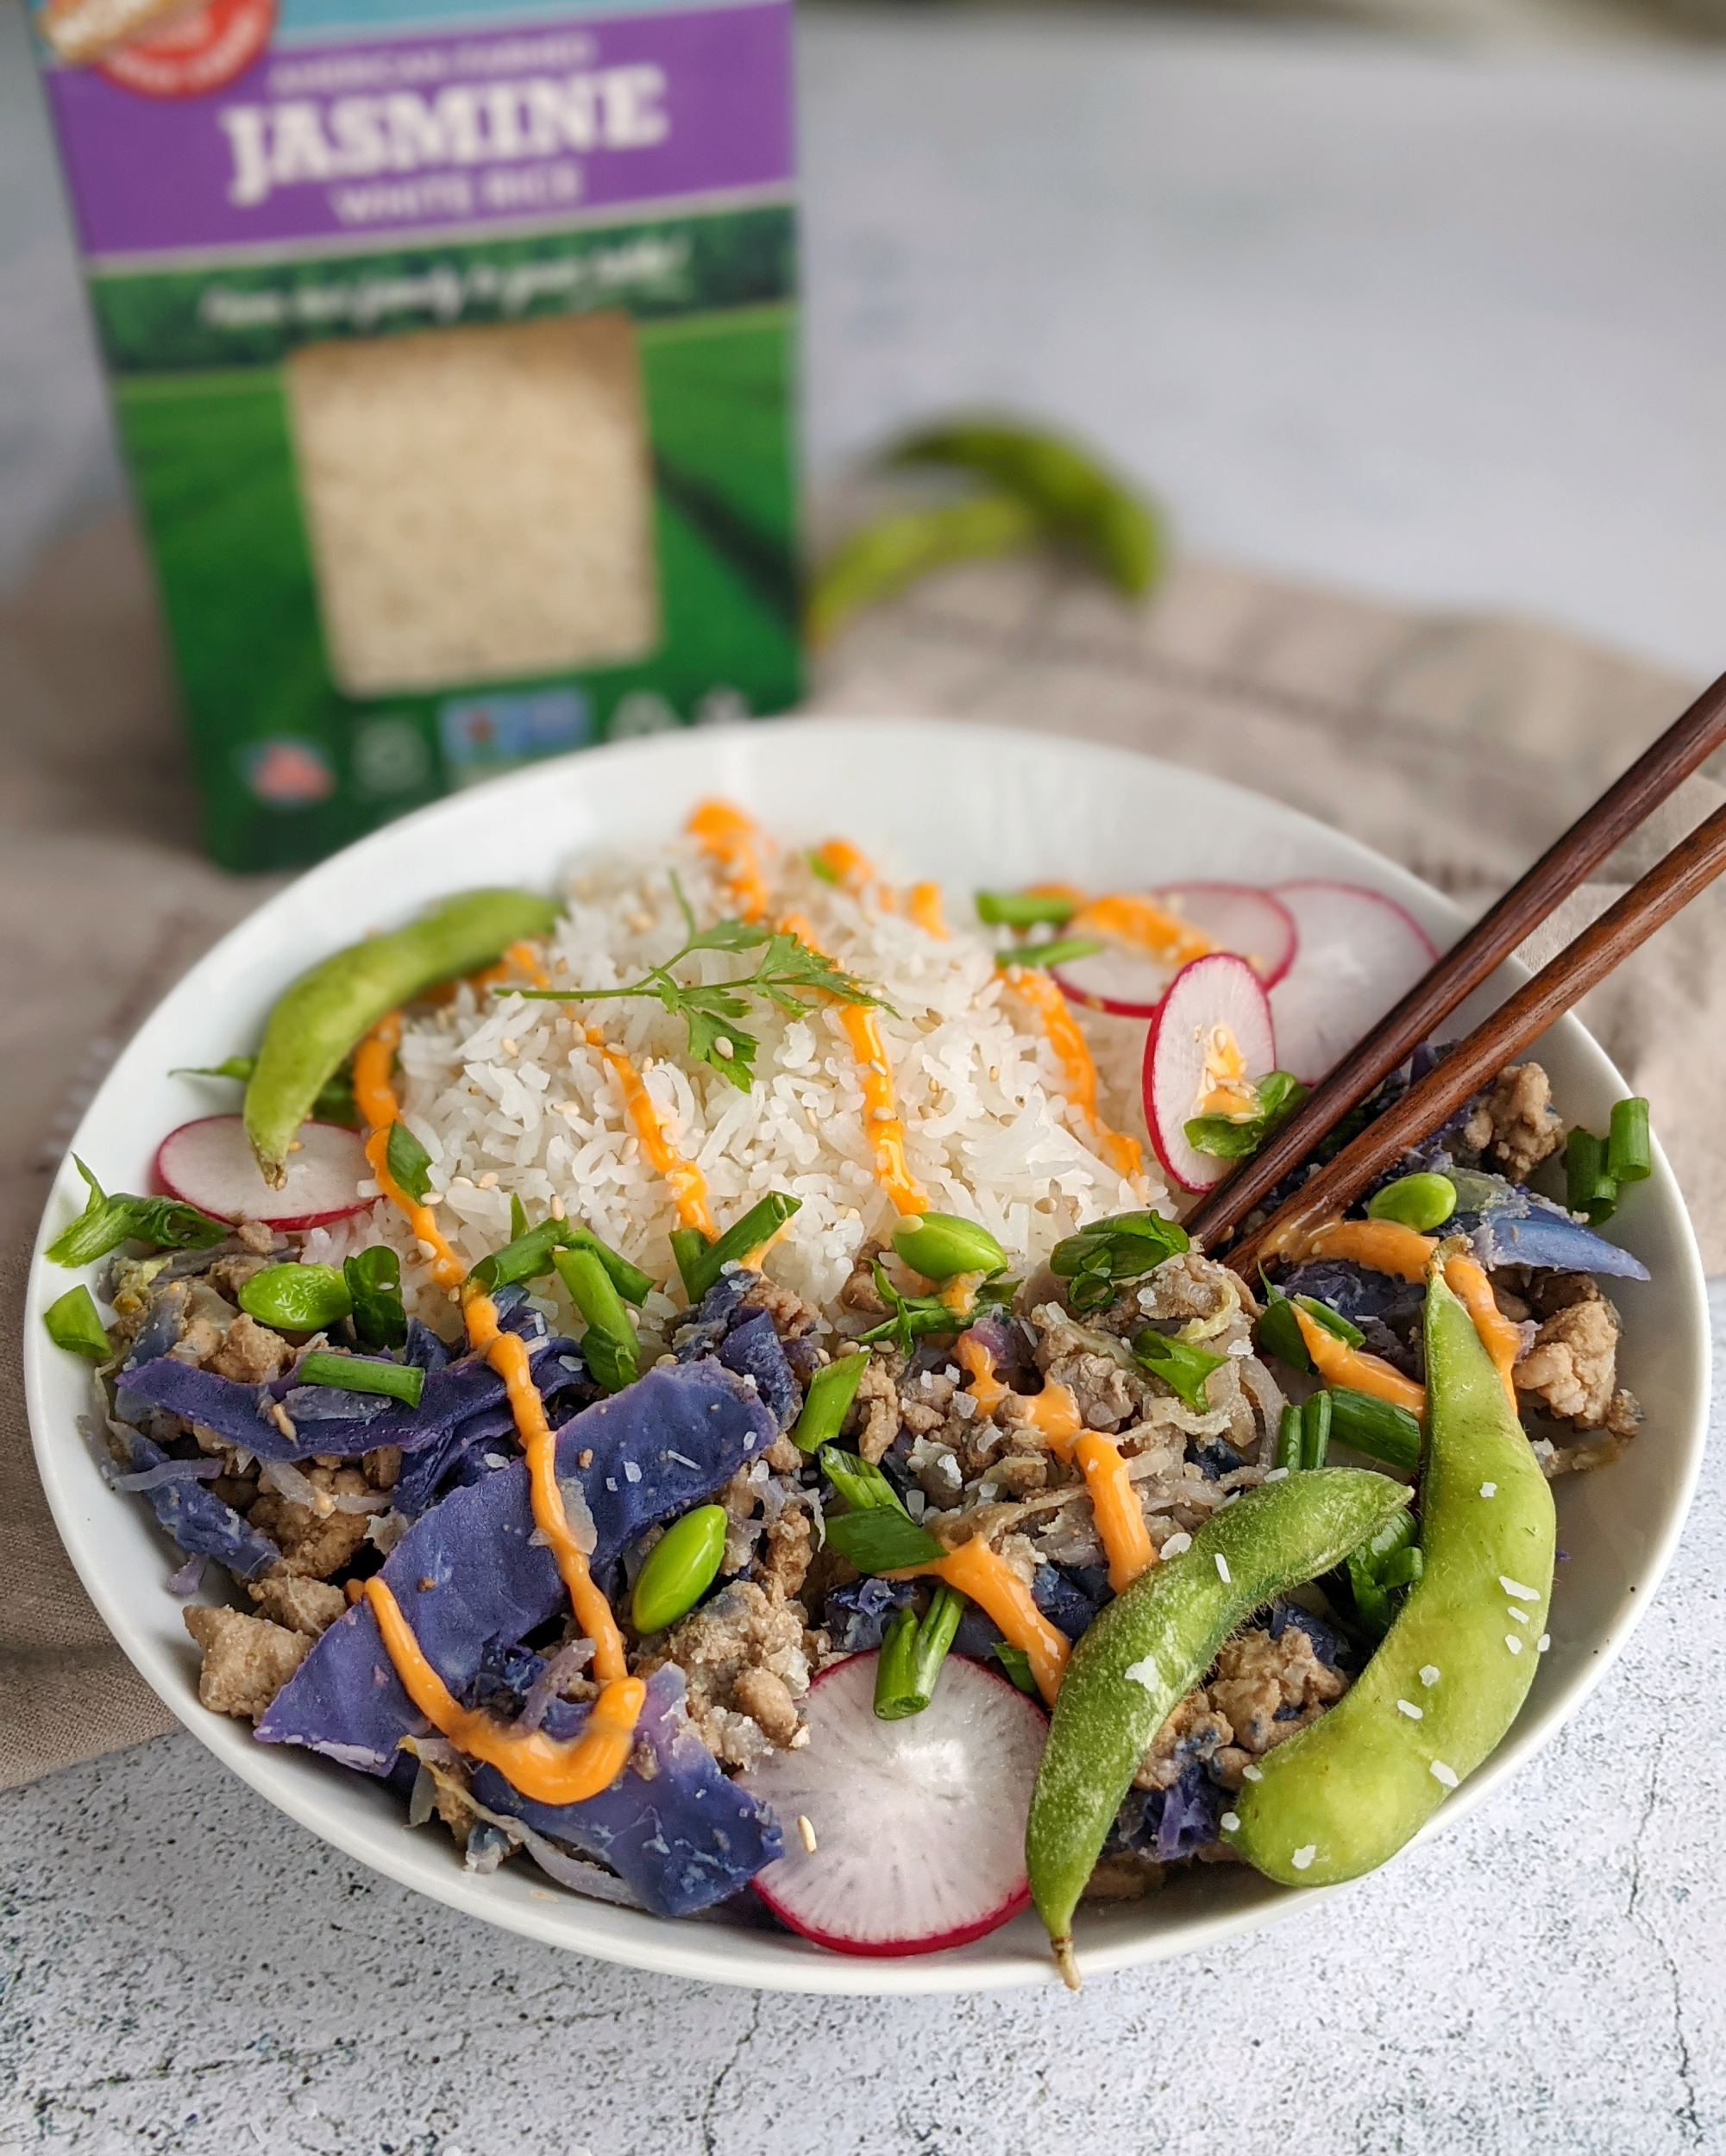 Ralston Jasmine Rice From Terra Powders Clean Food Market With Asian Recipe Egg Roll In A Bowl